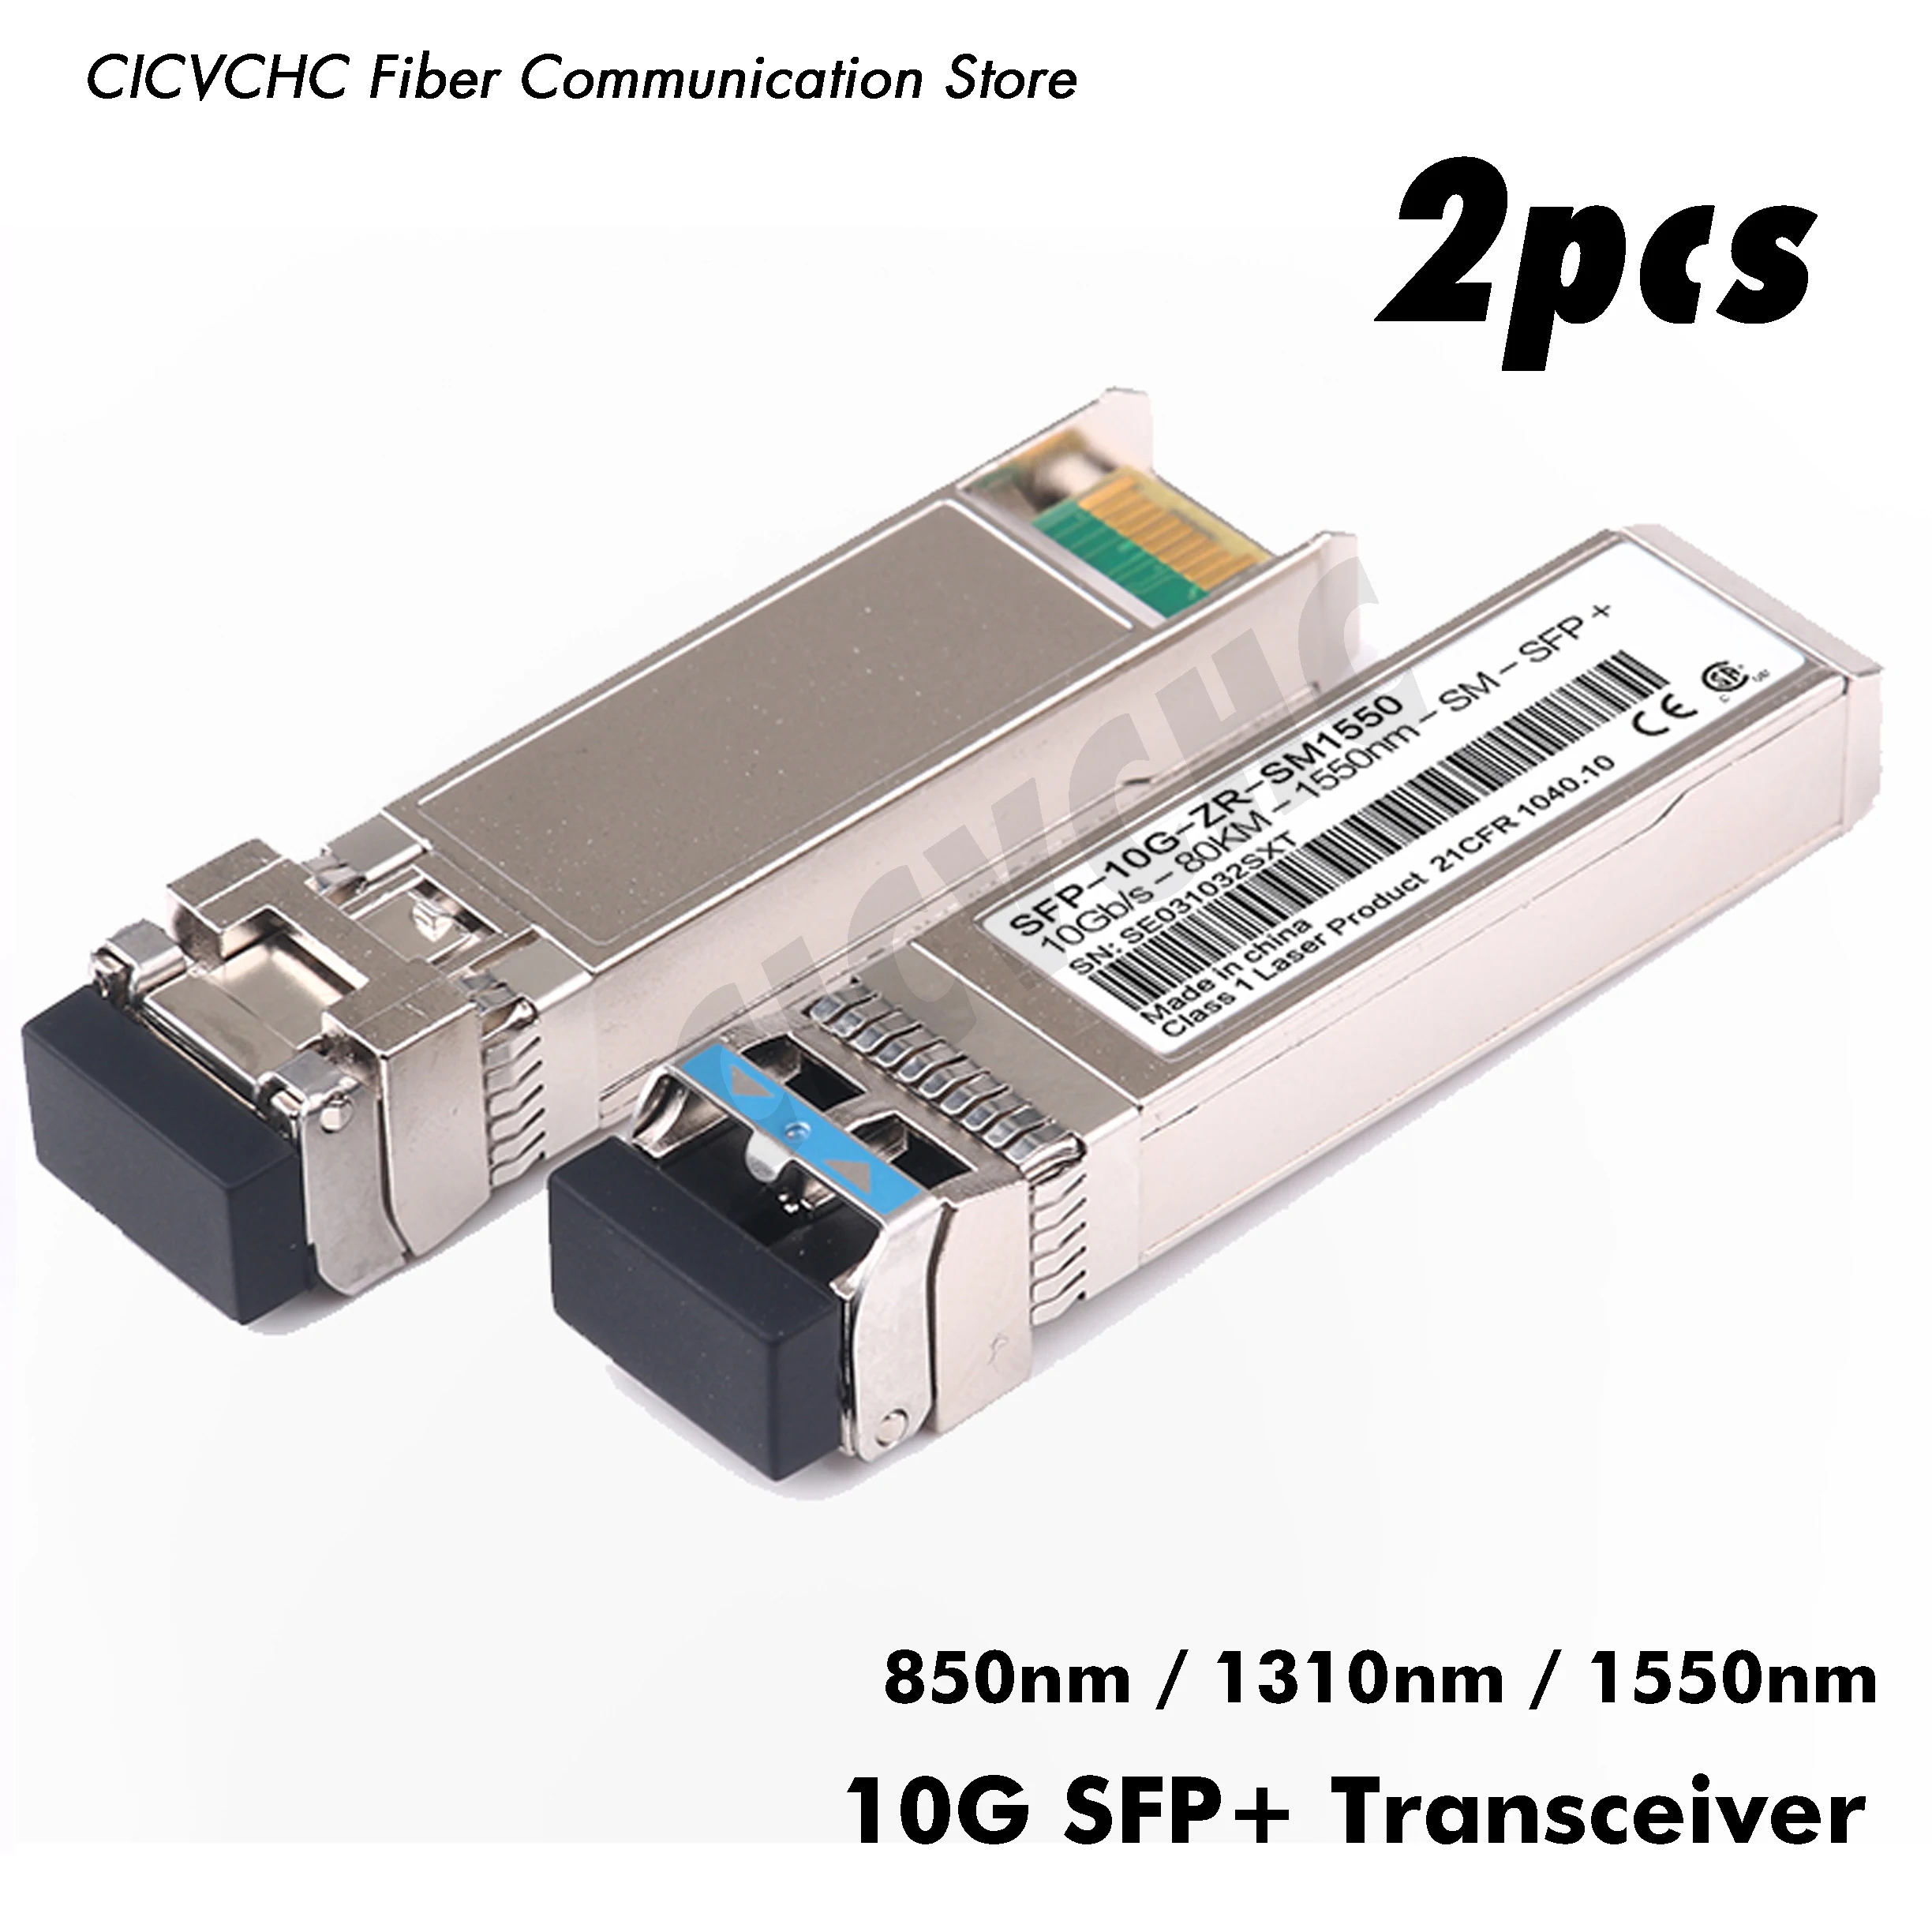 2pcs 10Gb/s SFP+ Transeiver with Duplex LC SM or MM 850nm/1310nm/1550nm DDM 10gb pci e nic network card with broadcom bcm57810s chipset pci express ethernet lan adapter support windows server linux